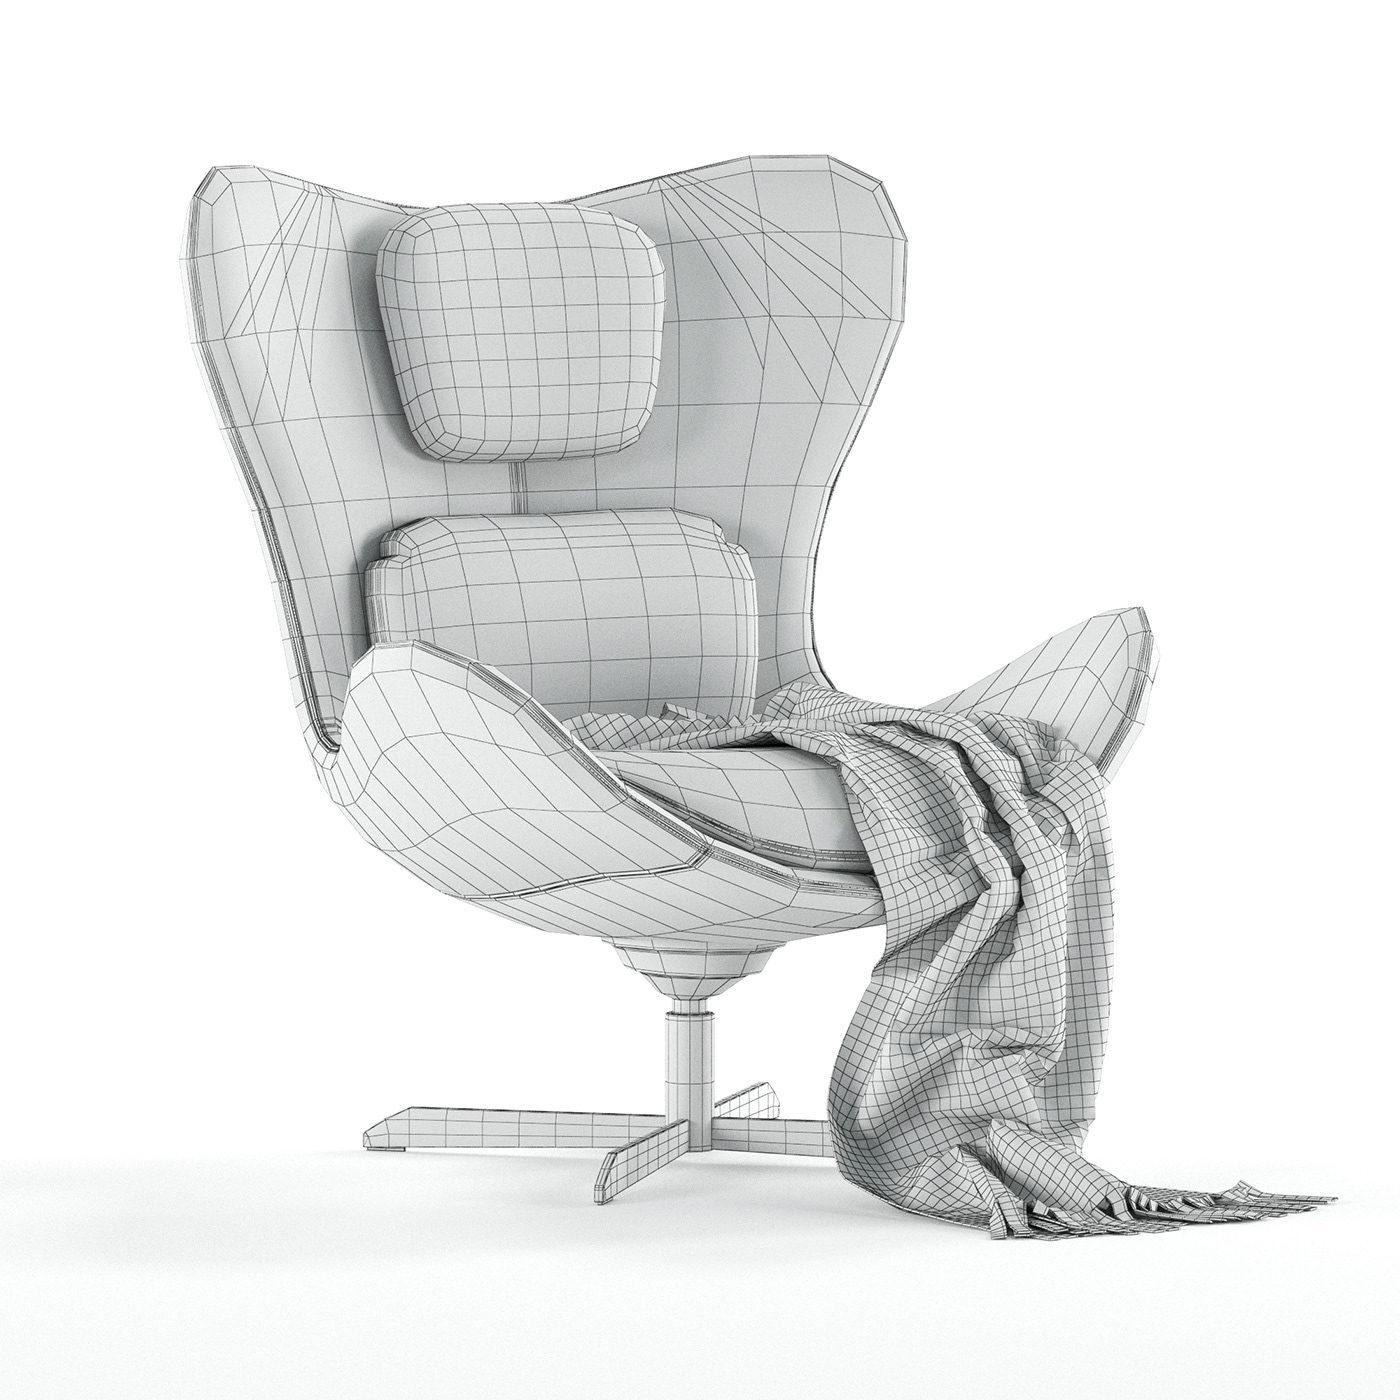 3D 3ds max furniture Render visualization vray